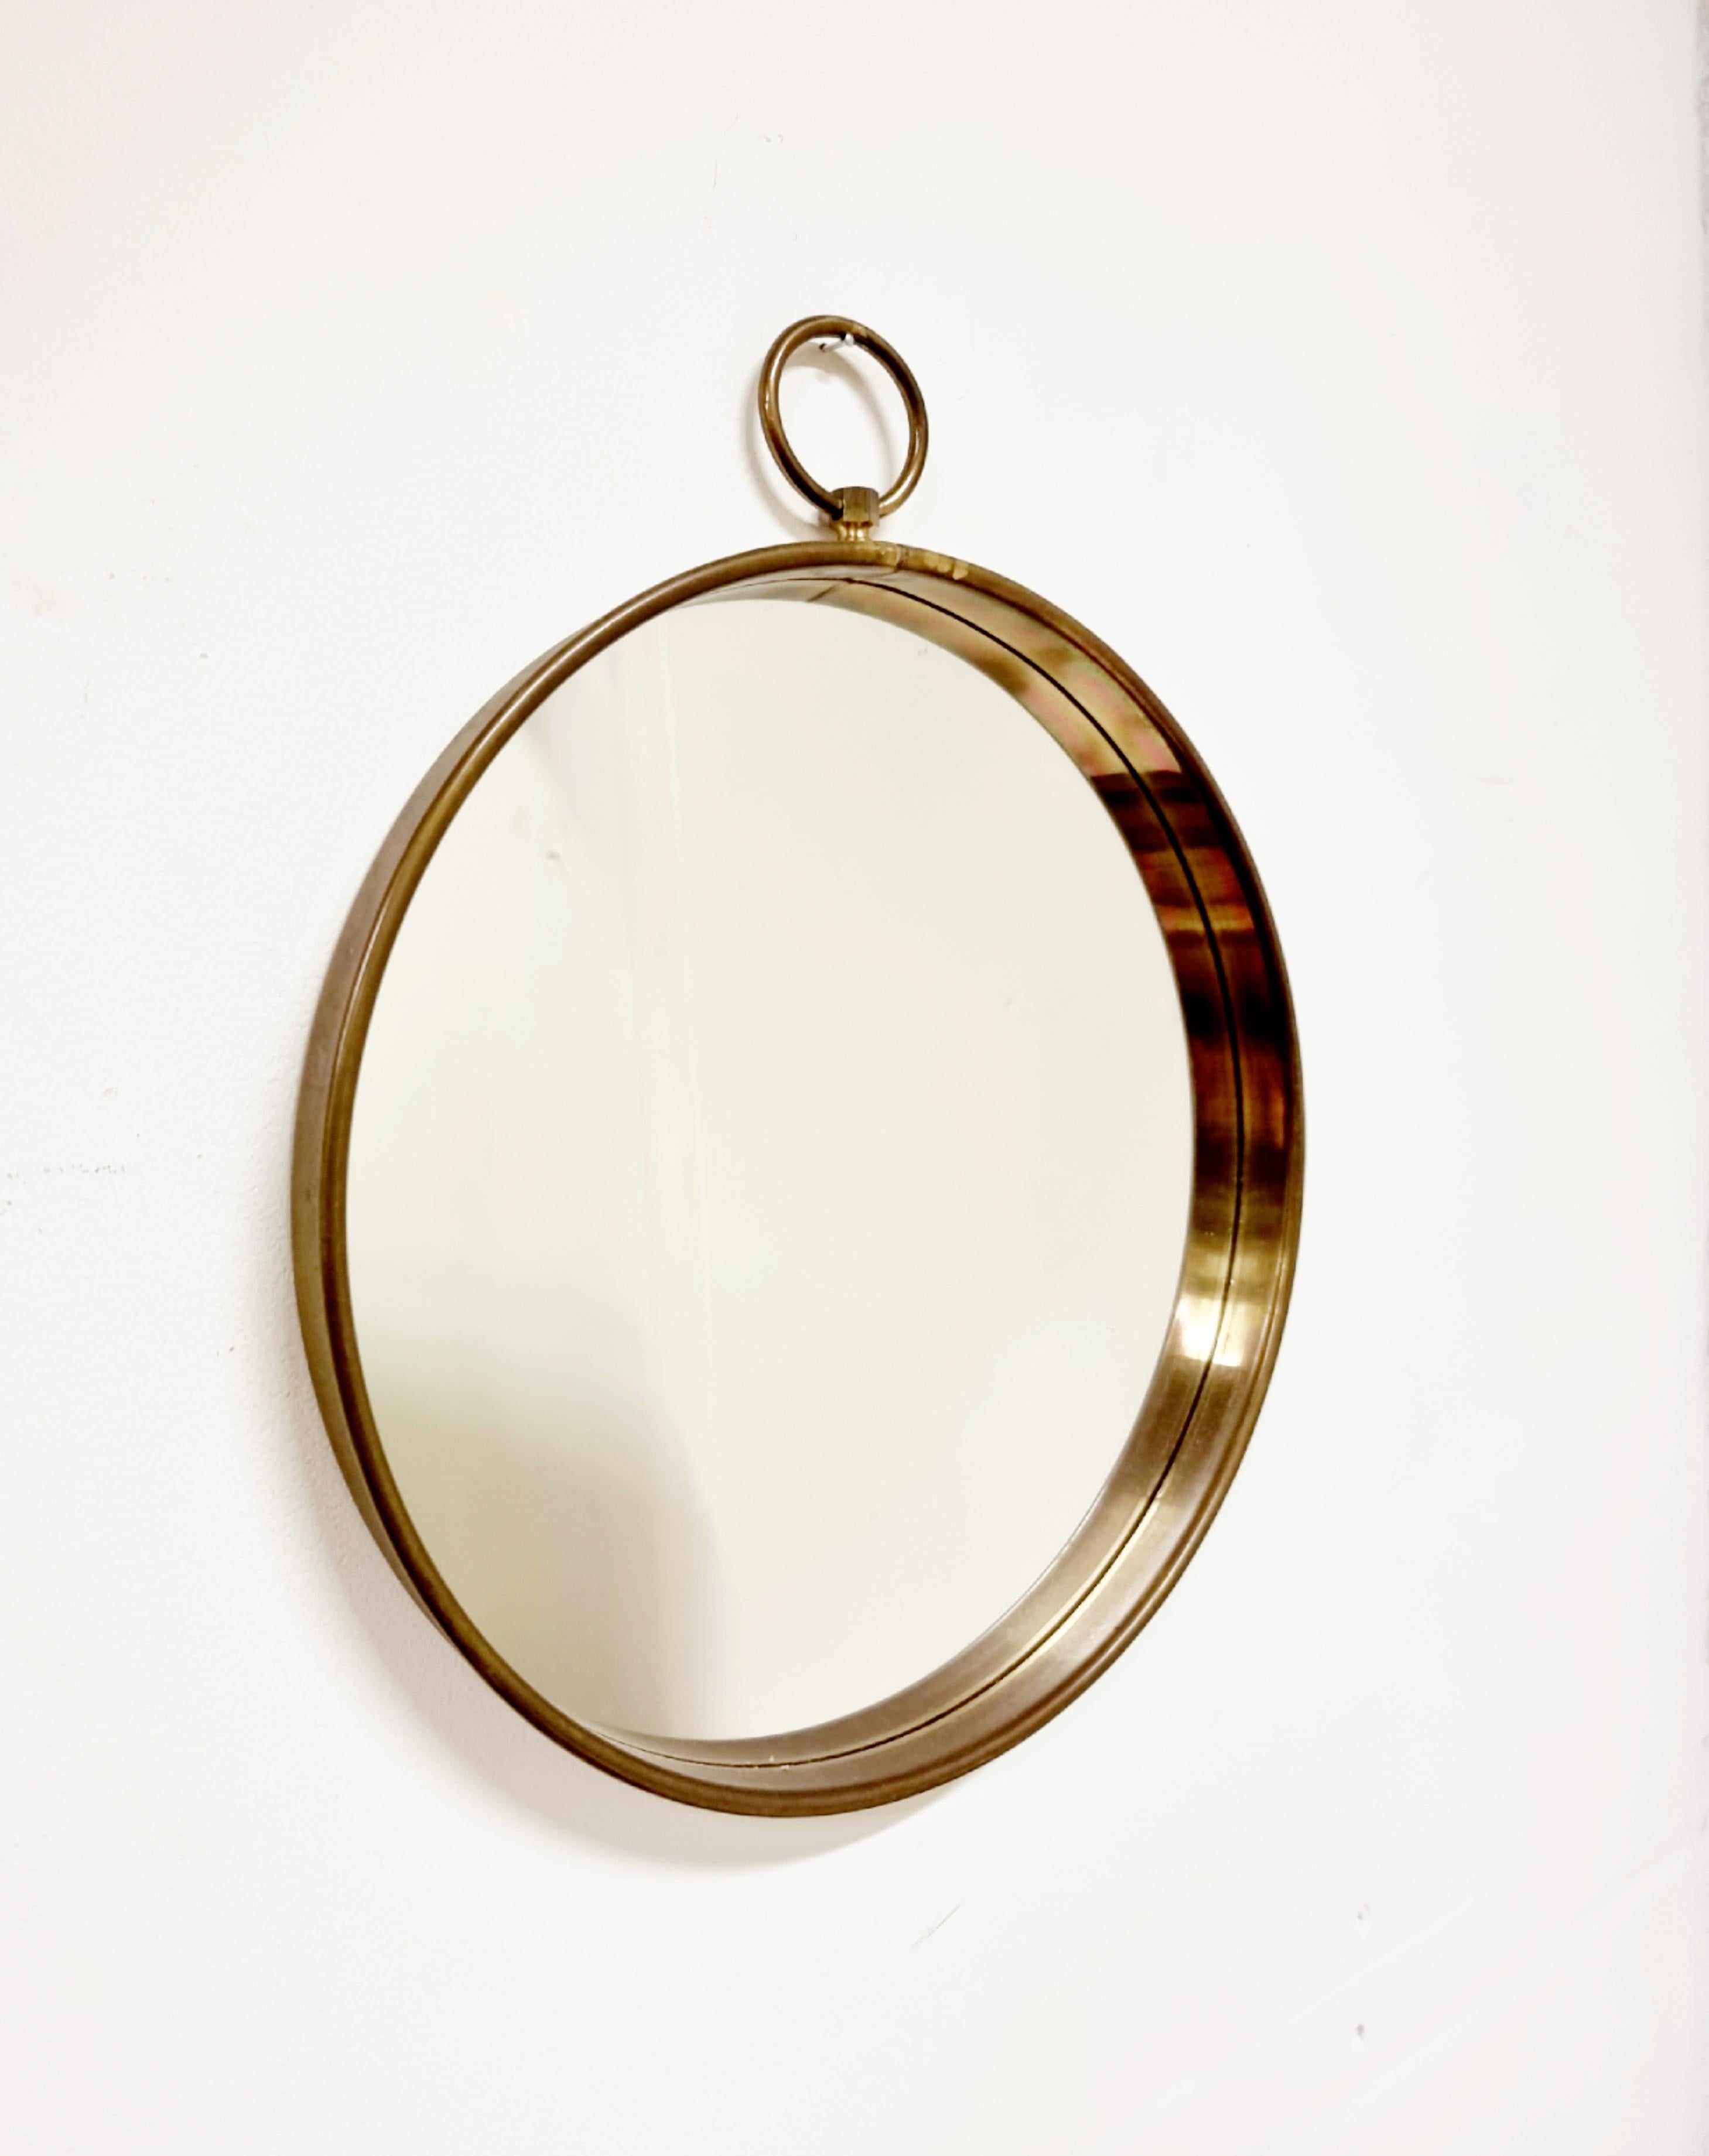 Pocketwatch shaped mirror with brass frame. Italian, Midcentury. 

With beautiful patina which shows the age. 

Please feel free to contact us regarding additional photos or information.